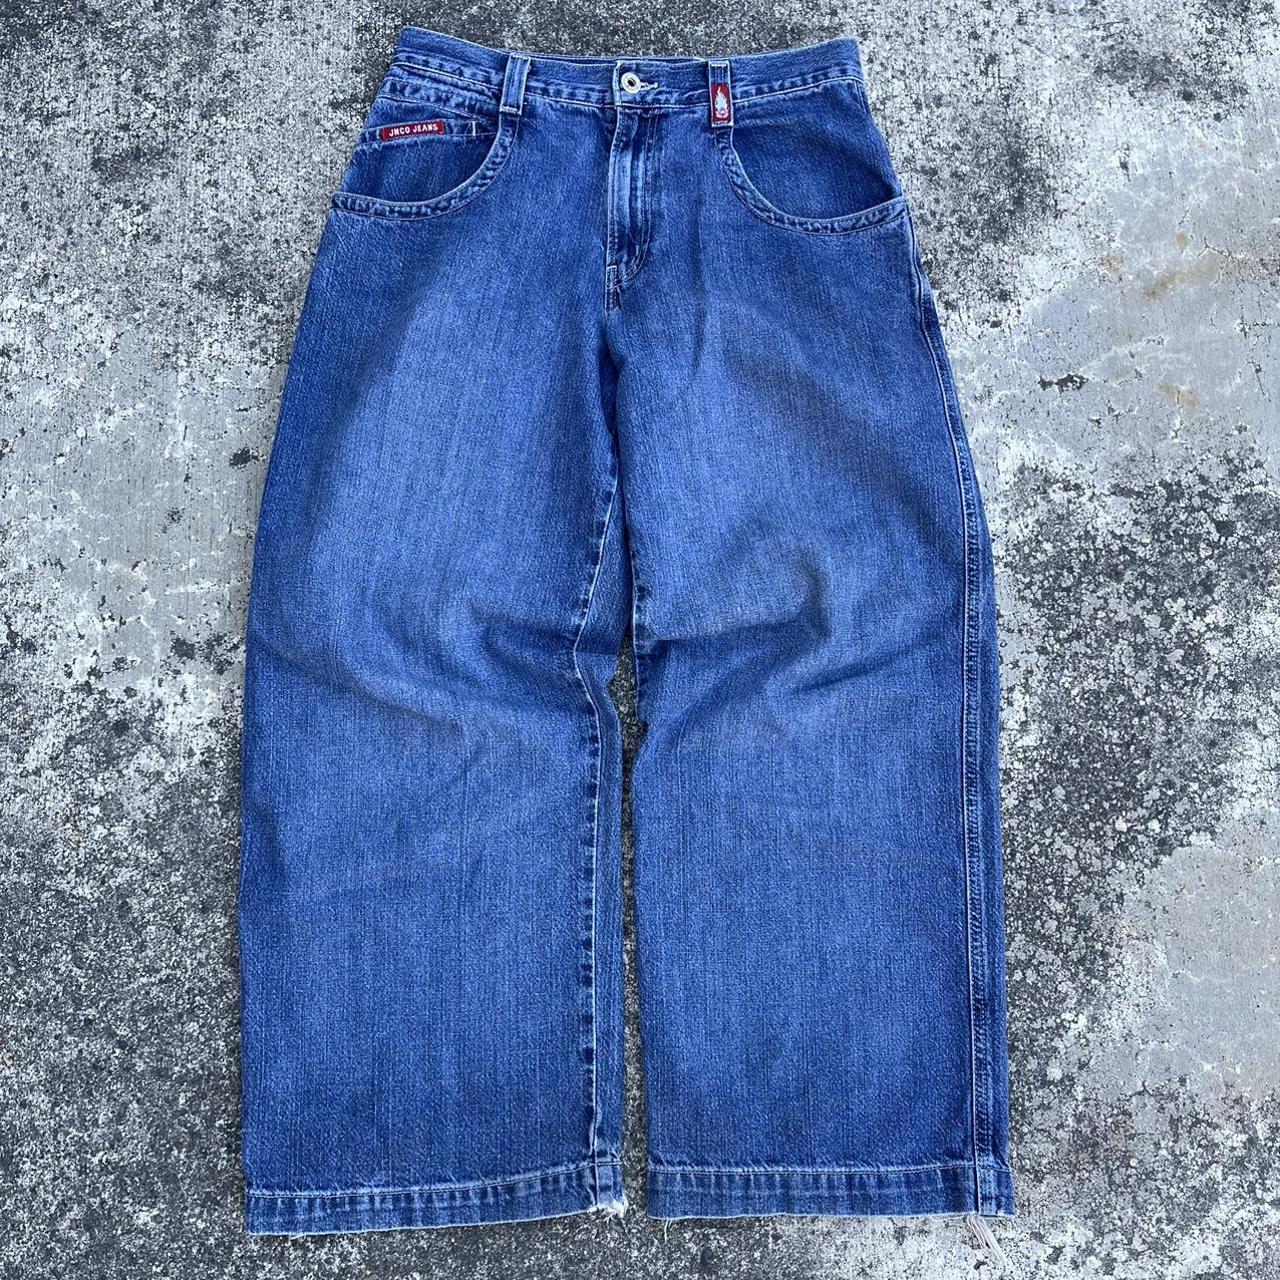 vintage bulldog jnco tribal jeans This is one of,... - Depop